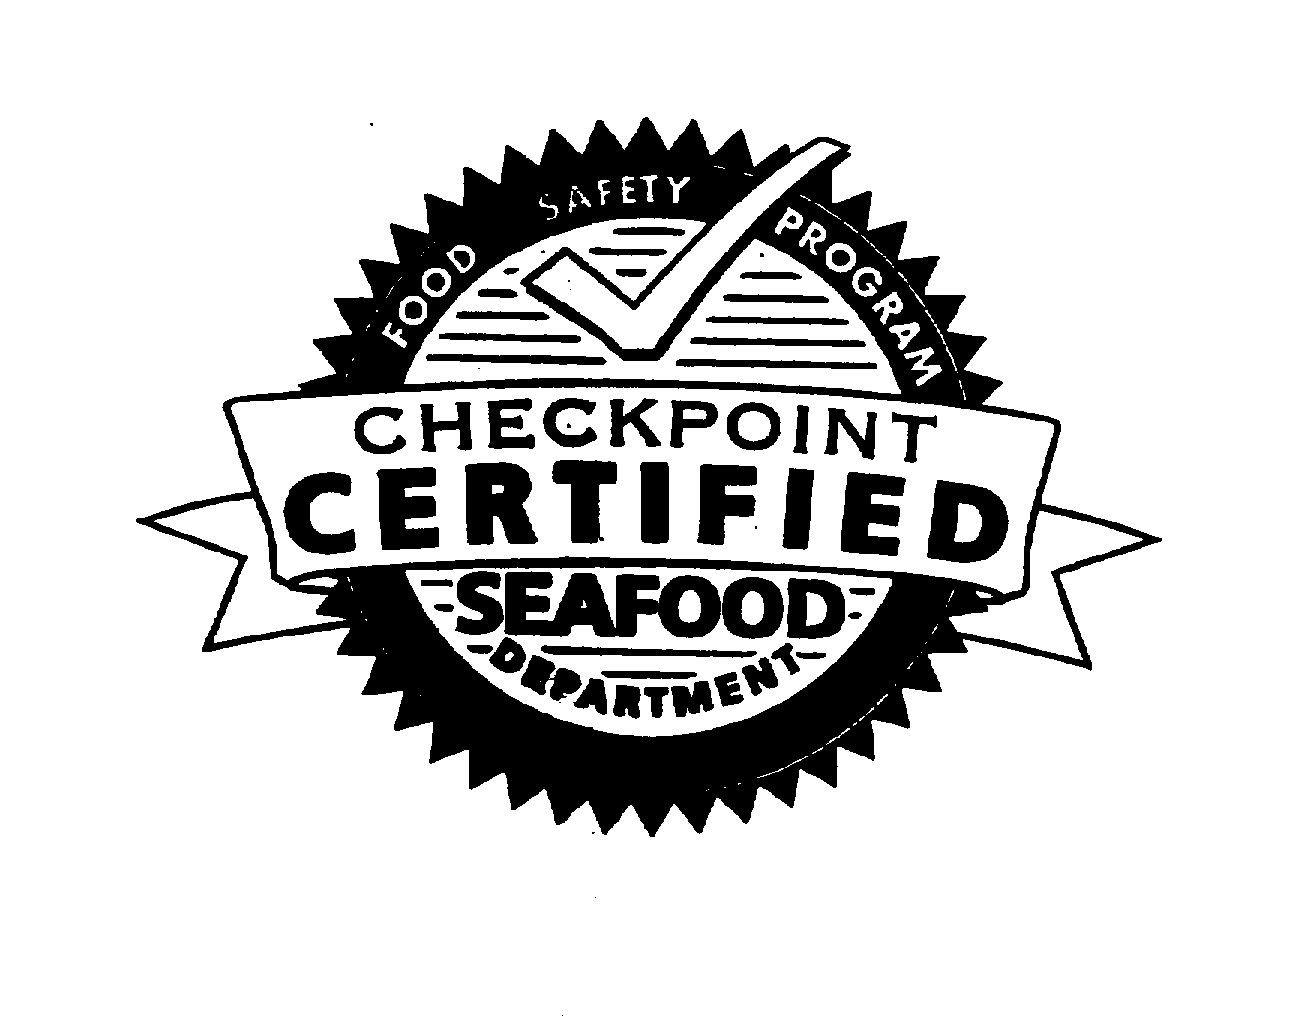 CHECKPOINT CERTIFIED SEAFOOD DEPARTMENT FOOD SAFETY PROGRAM